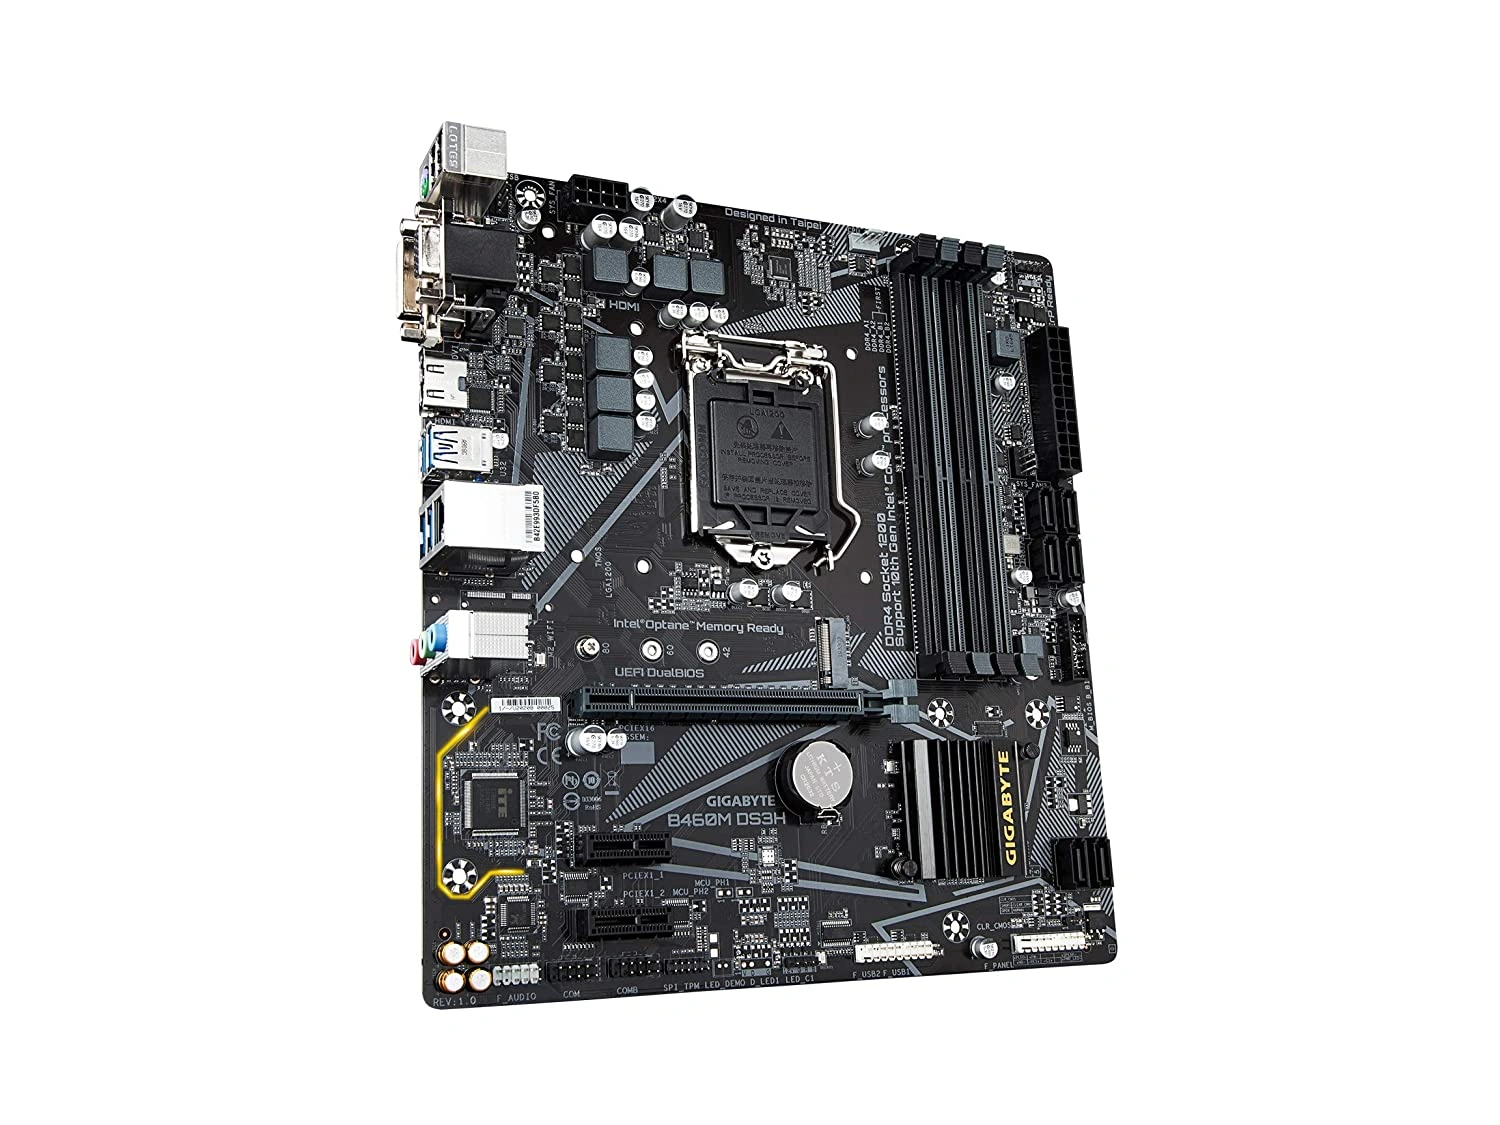 GIGABYTE B460M DS3H Ultra Durable Motherboard with GIGABYTE 8118 Gaming LAN, PCIe Gen3 x4 M.2, 7 Colors RGB LED Strips Support-2